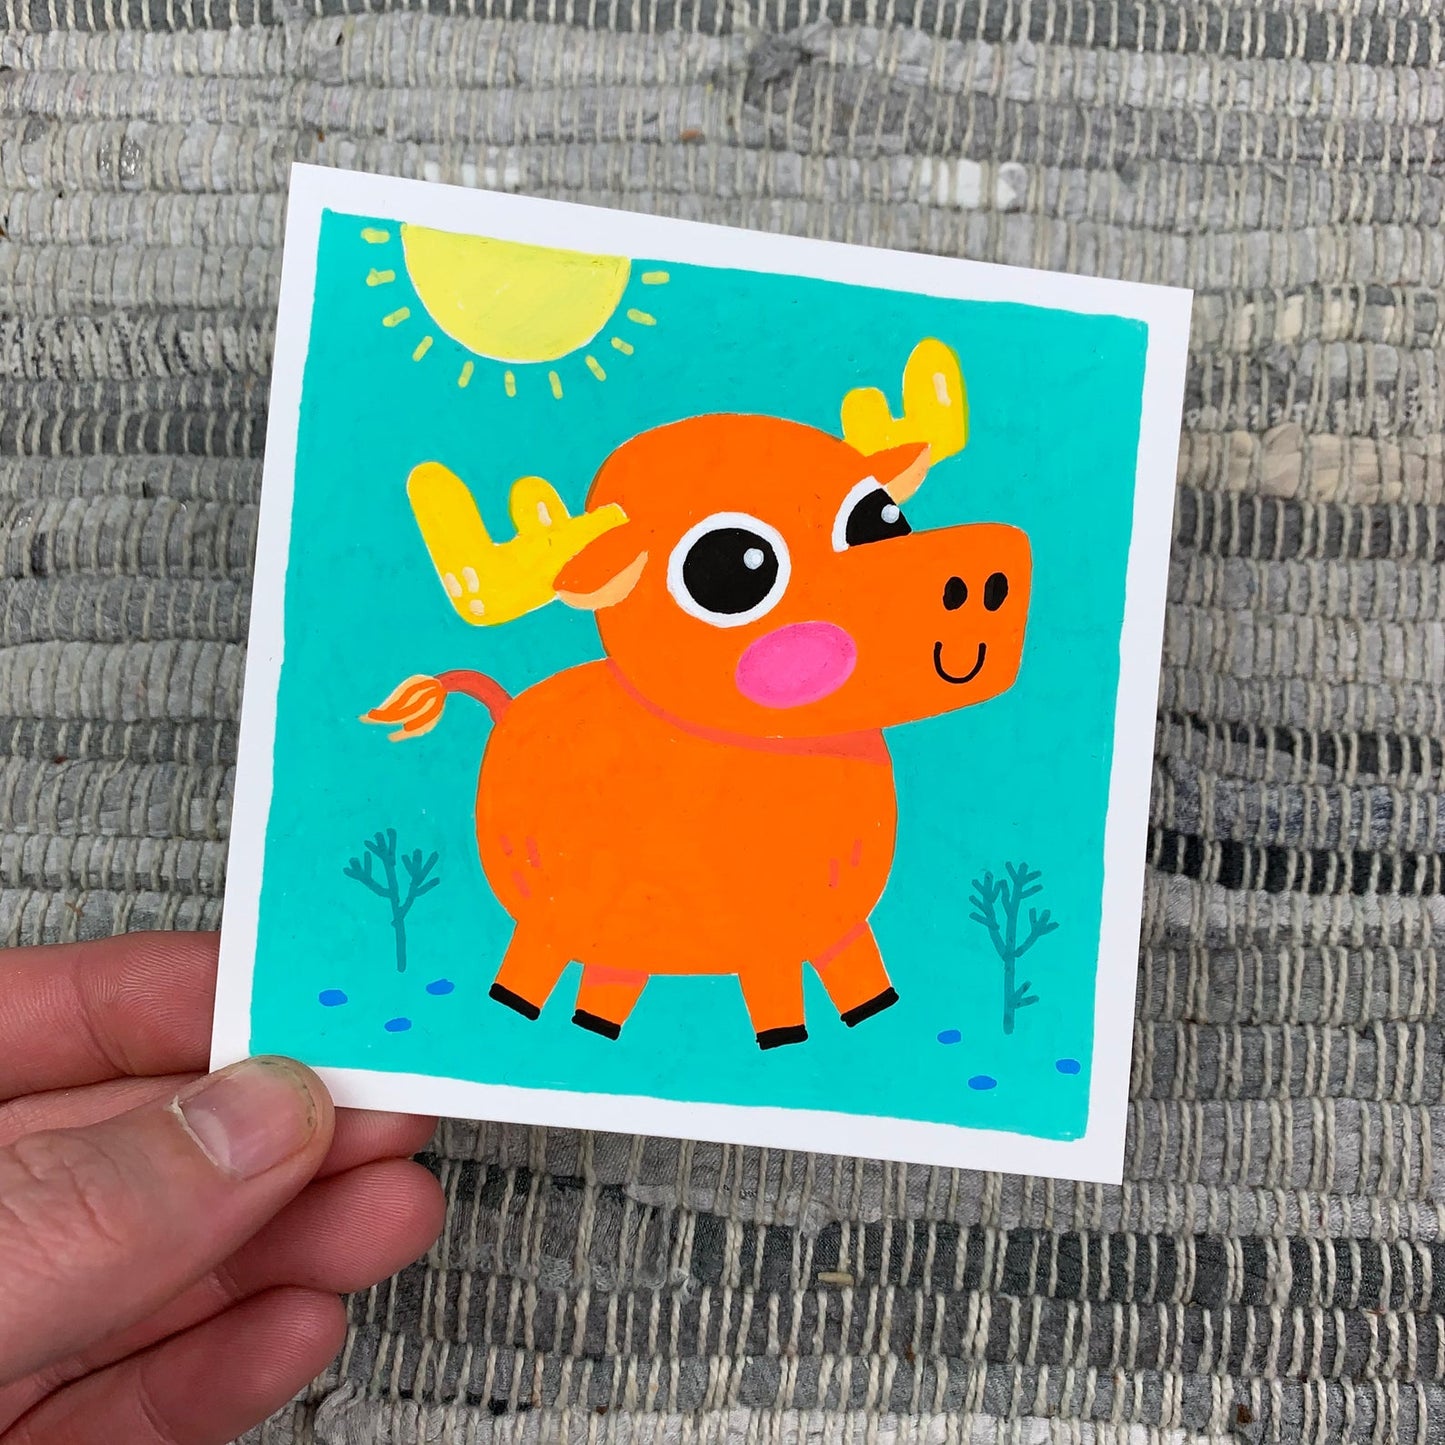 Original artwork of a cute orange moose on a bright teal background with a yellow sun shinning from above. Materials used: Uni-Posca paint markers.